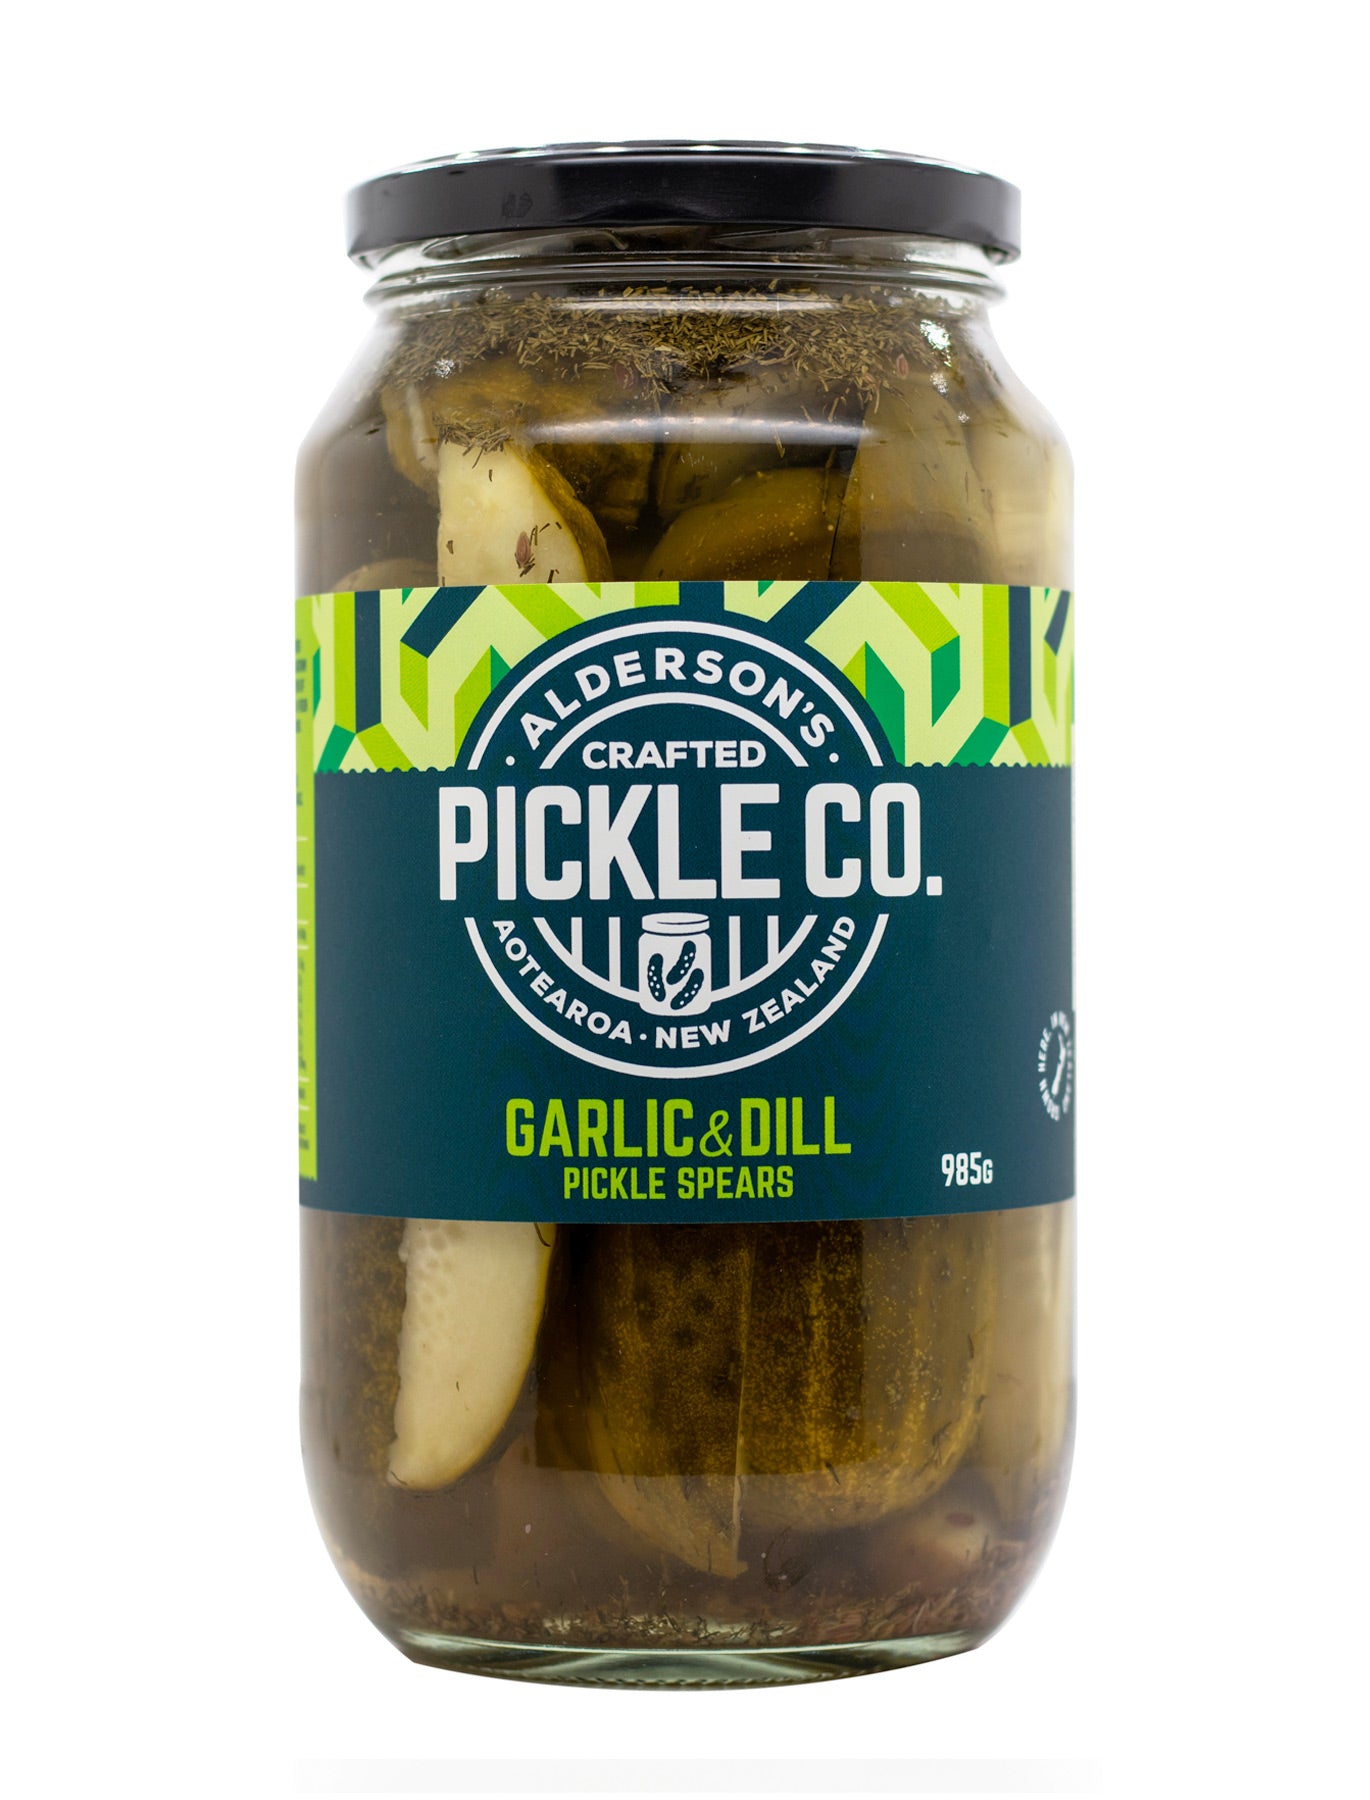 Garlic & Dill Pickled Spears